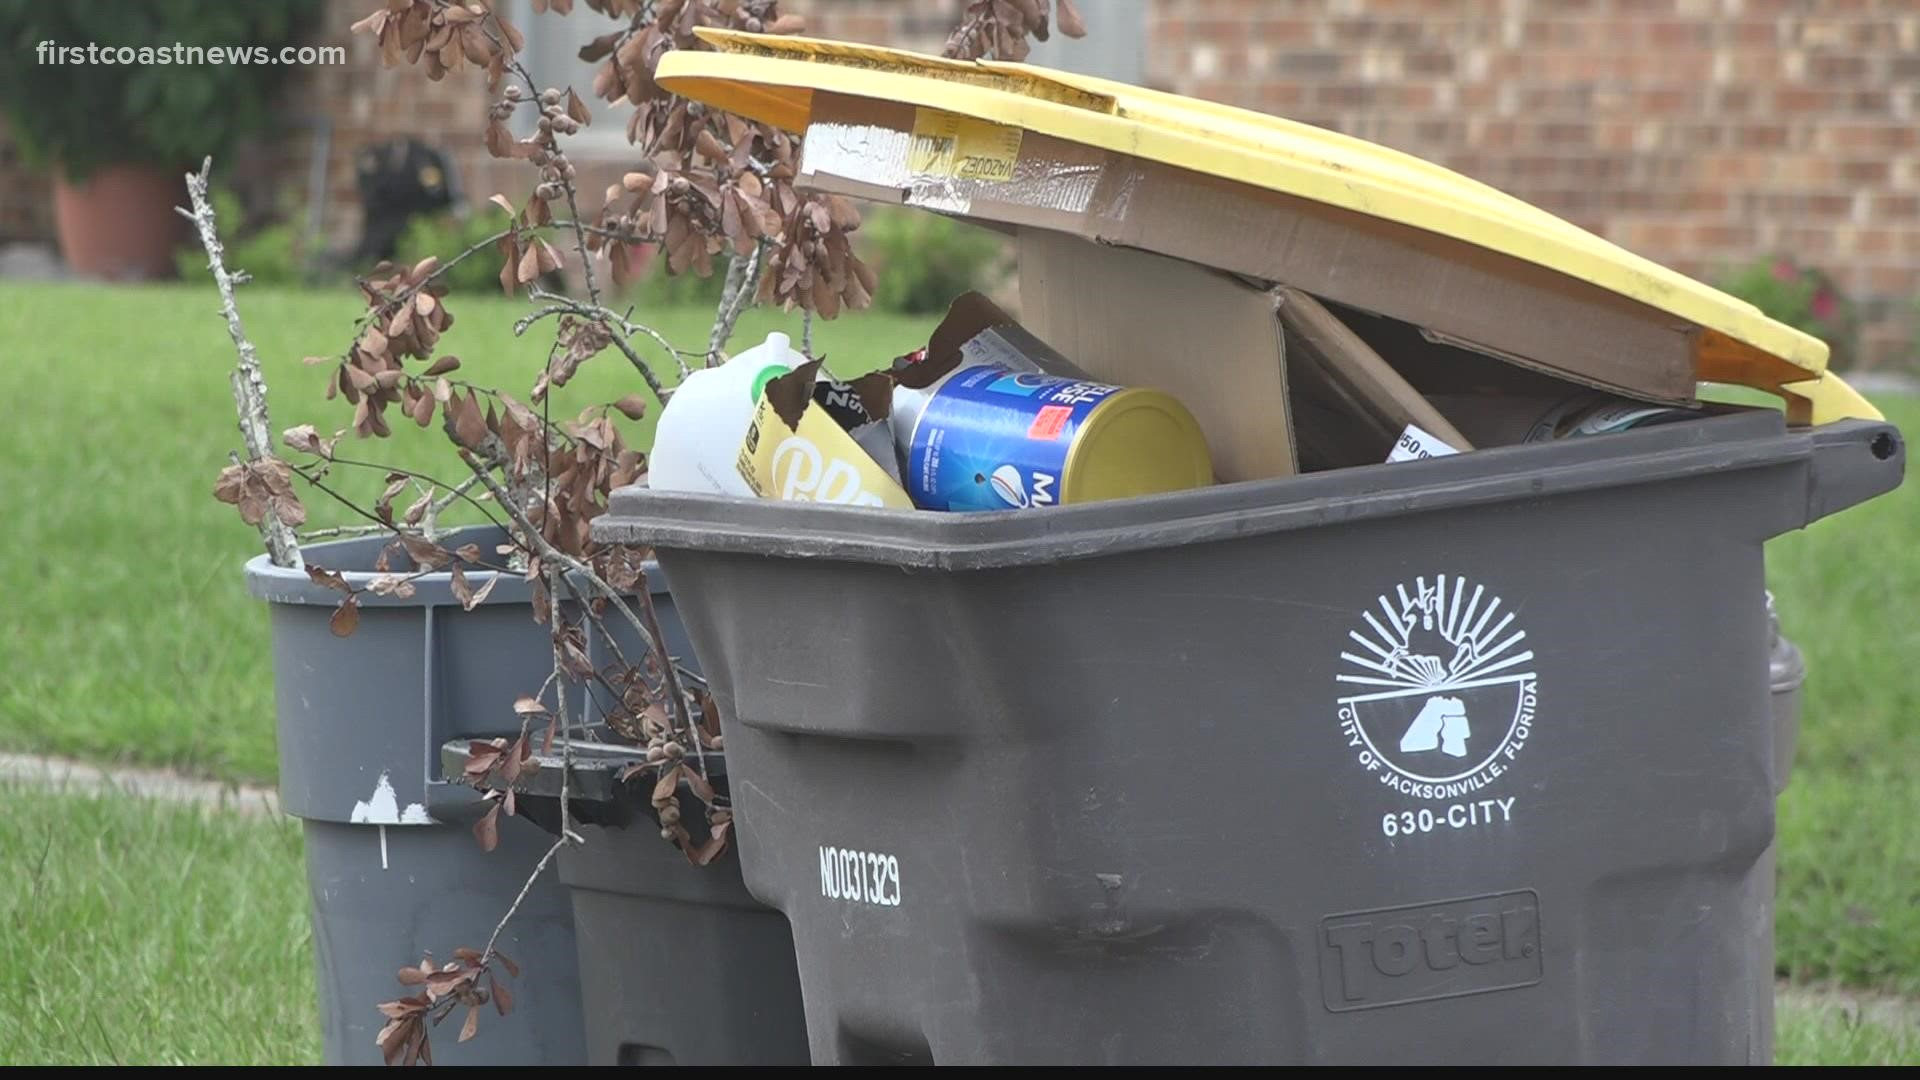 The 14 regional recycling drop off sites will go away while normal recycling pickup will resume on April 4.